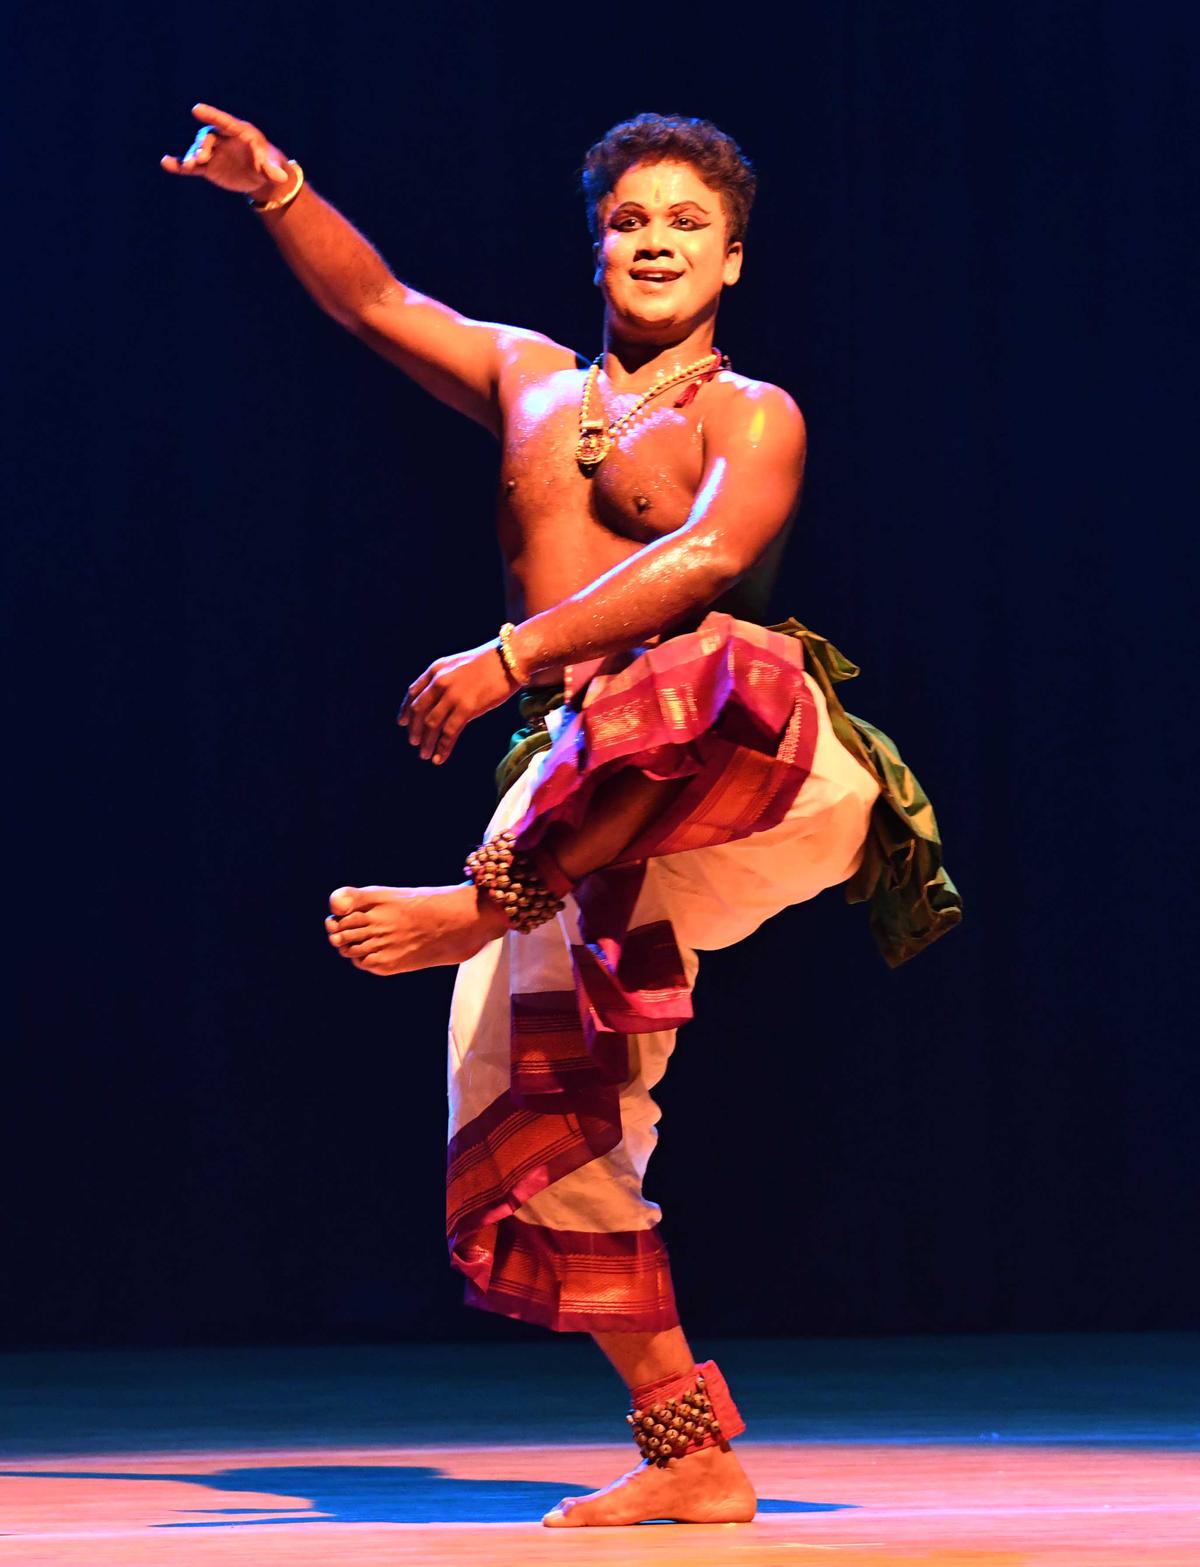 Bharatanatyam performance by Kali Veerapathiran, at The Music Academy’s dance festival, on January 04, 2023.  